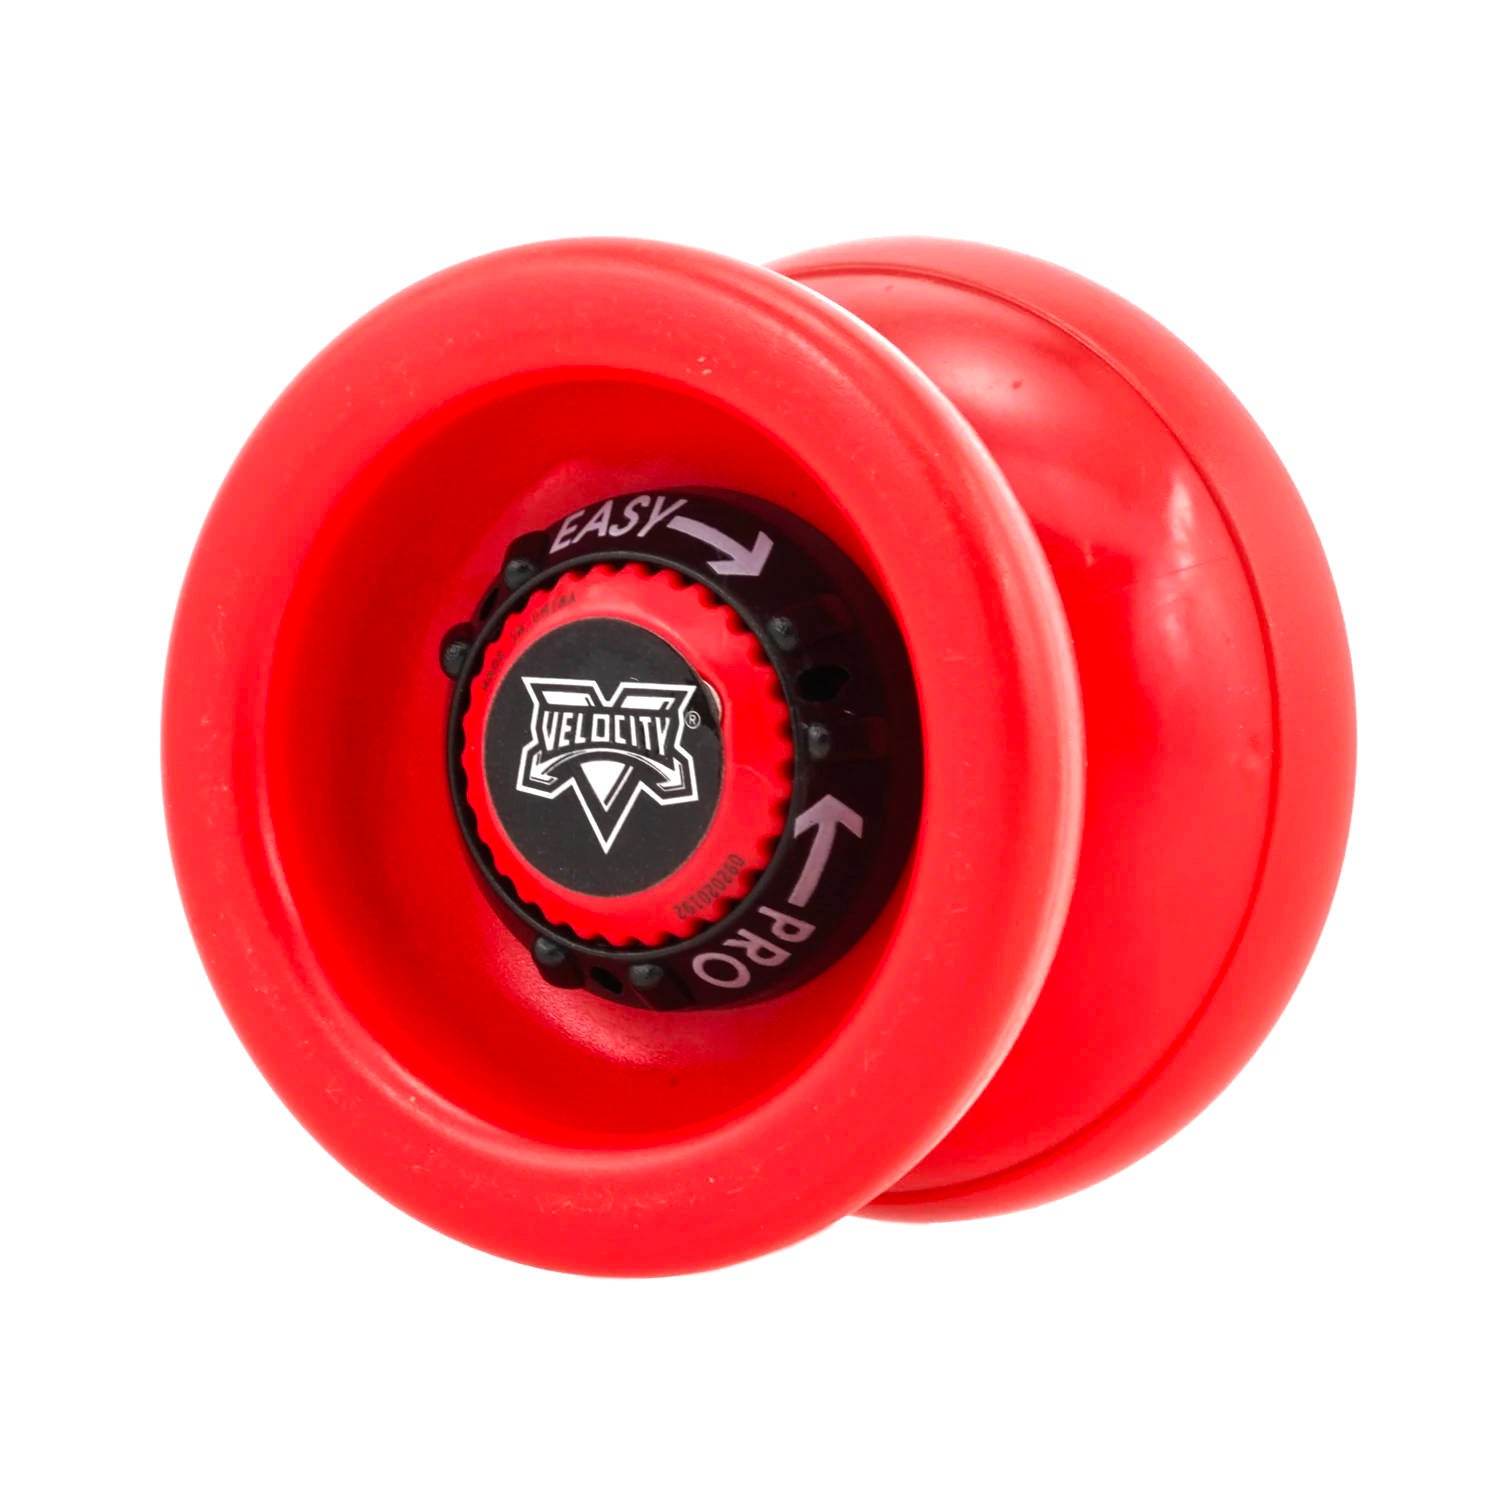 velocity yoyo red with black dial